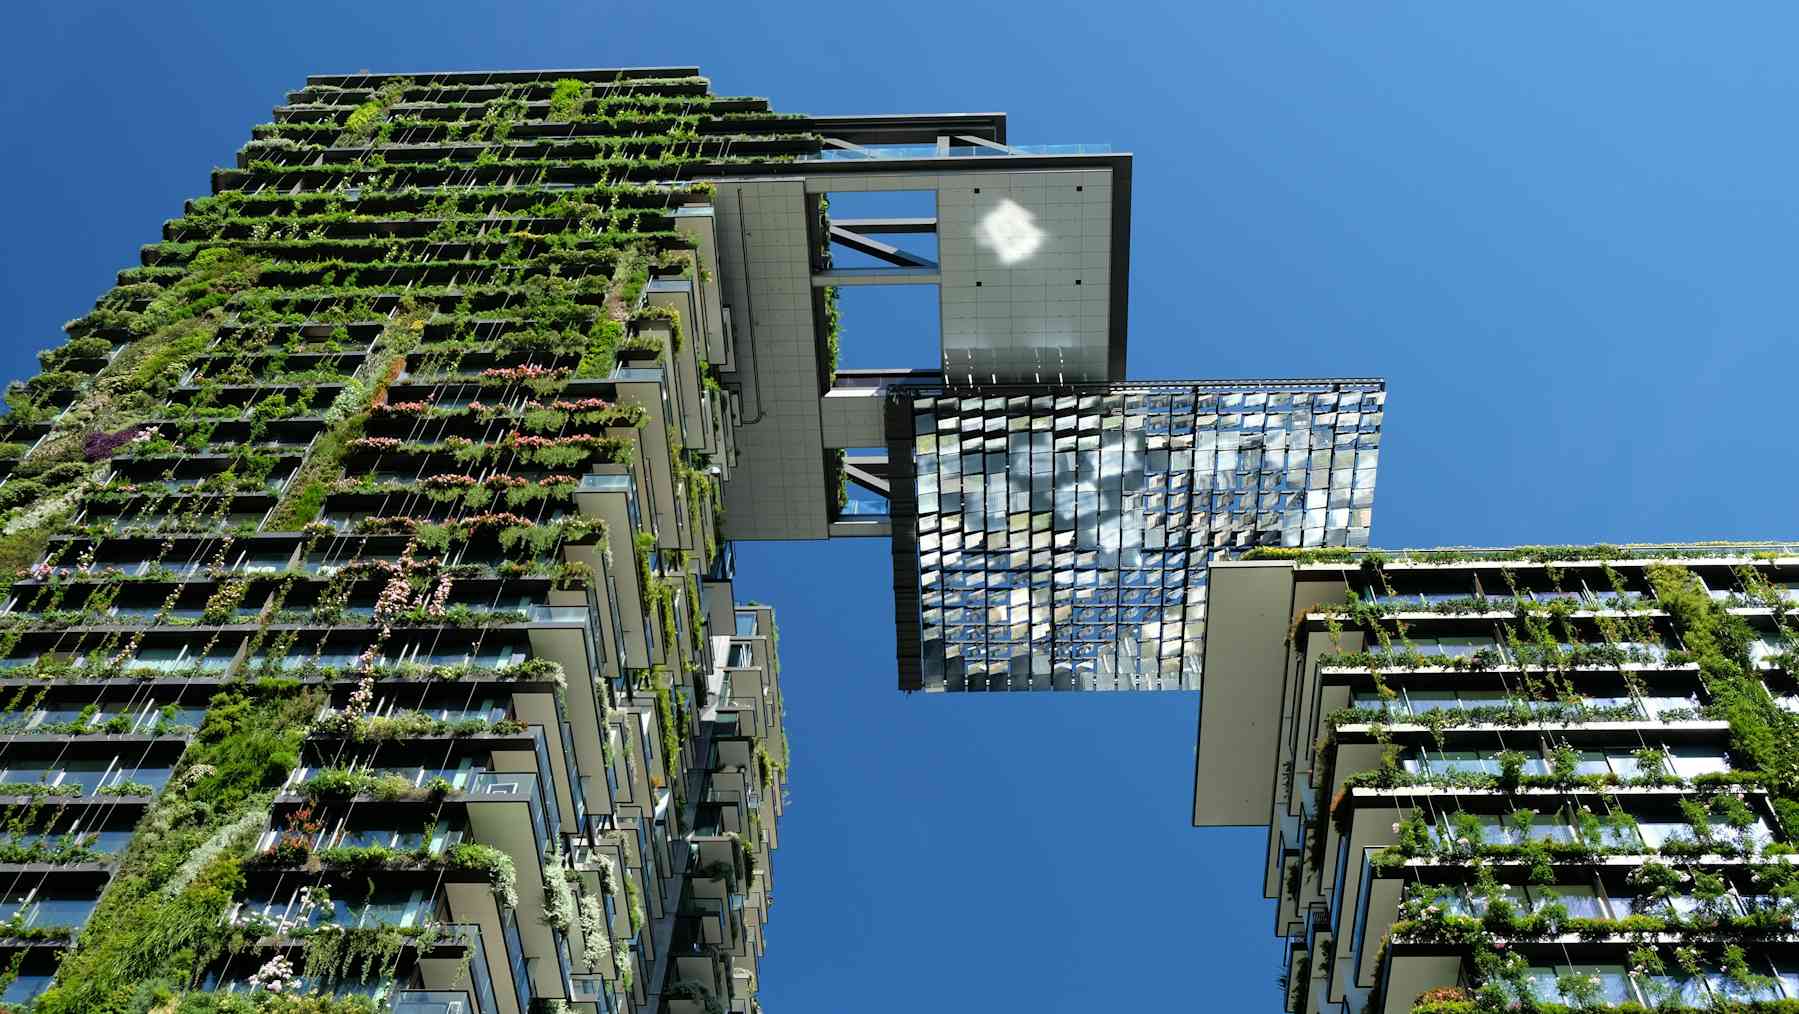 Green cities are mainstream Architecture & Design